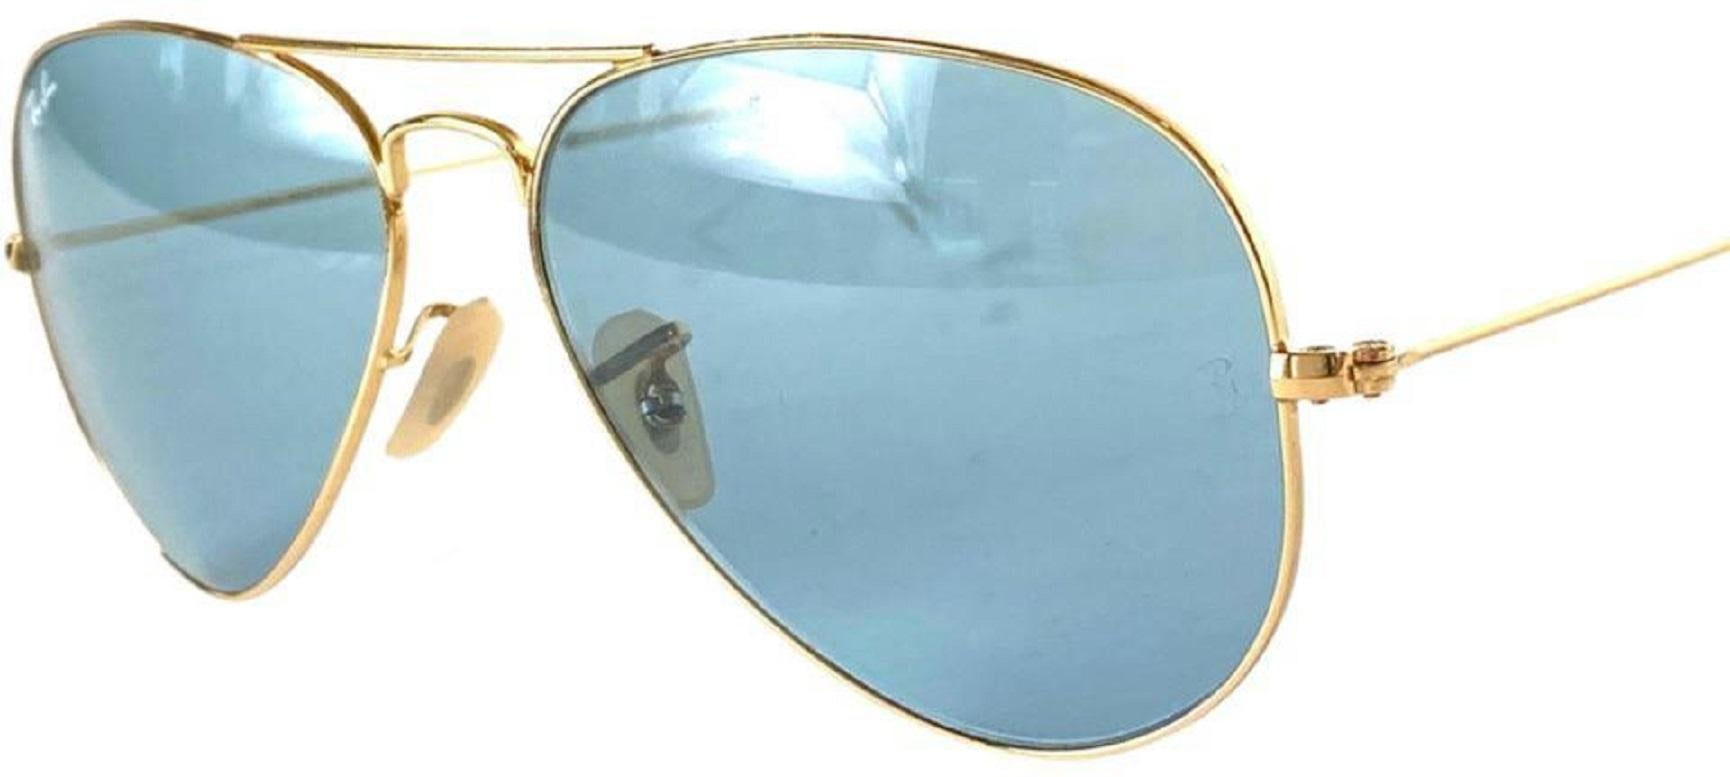 Ray-Ban Gold Rb3025 Aviator 2ray65 Sunglasses For Sale 3